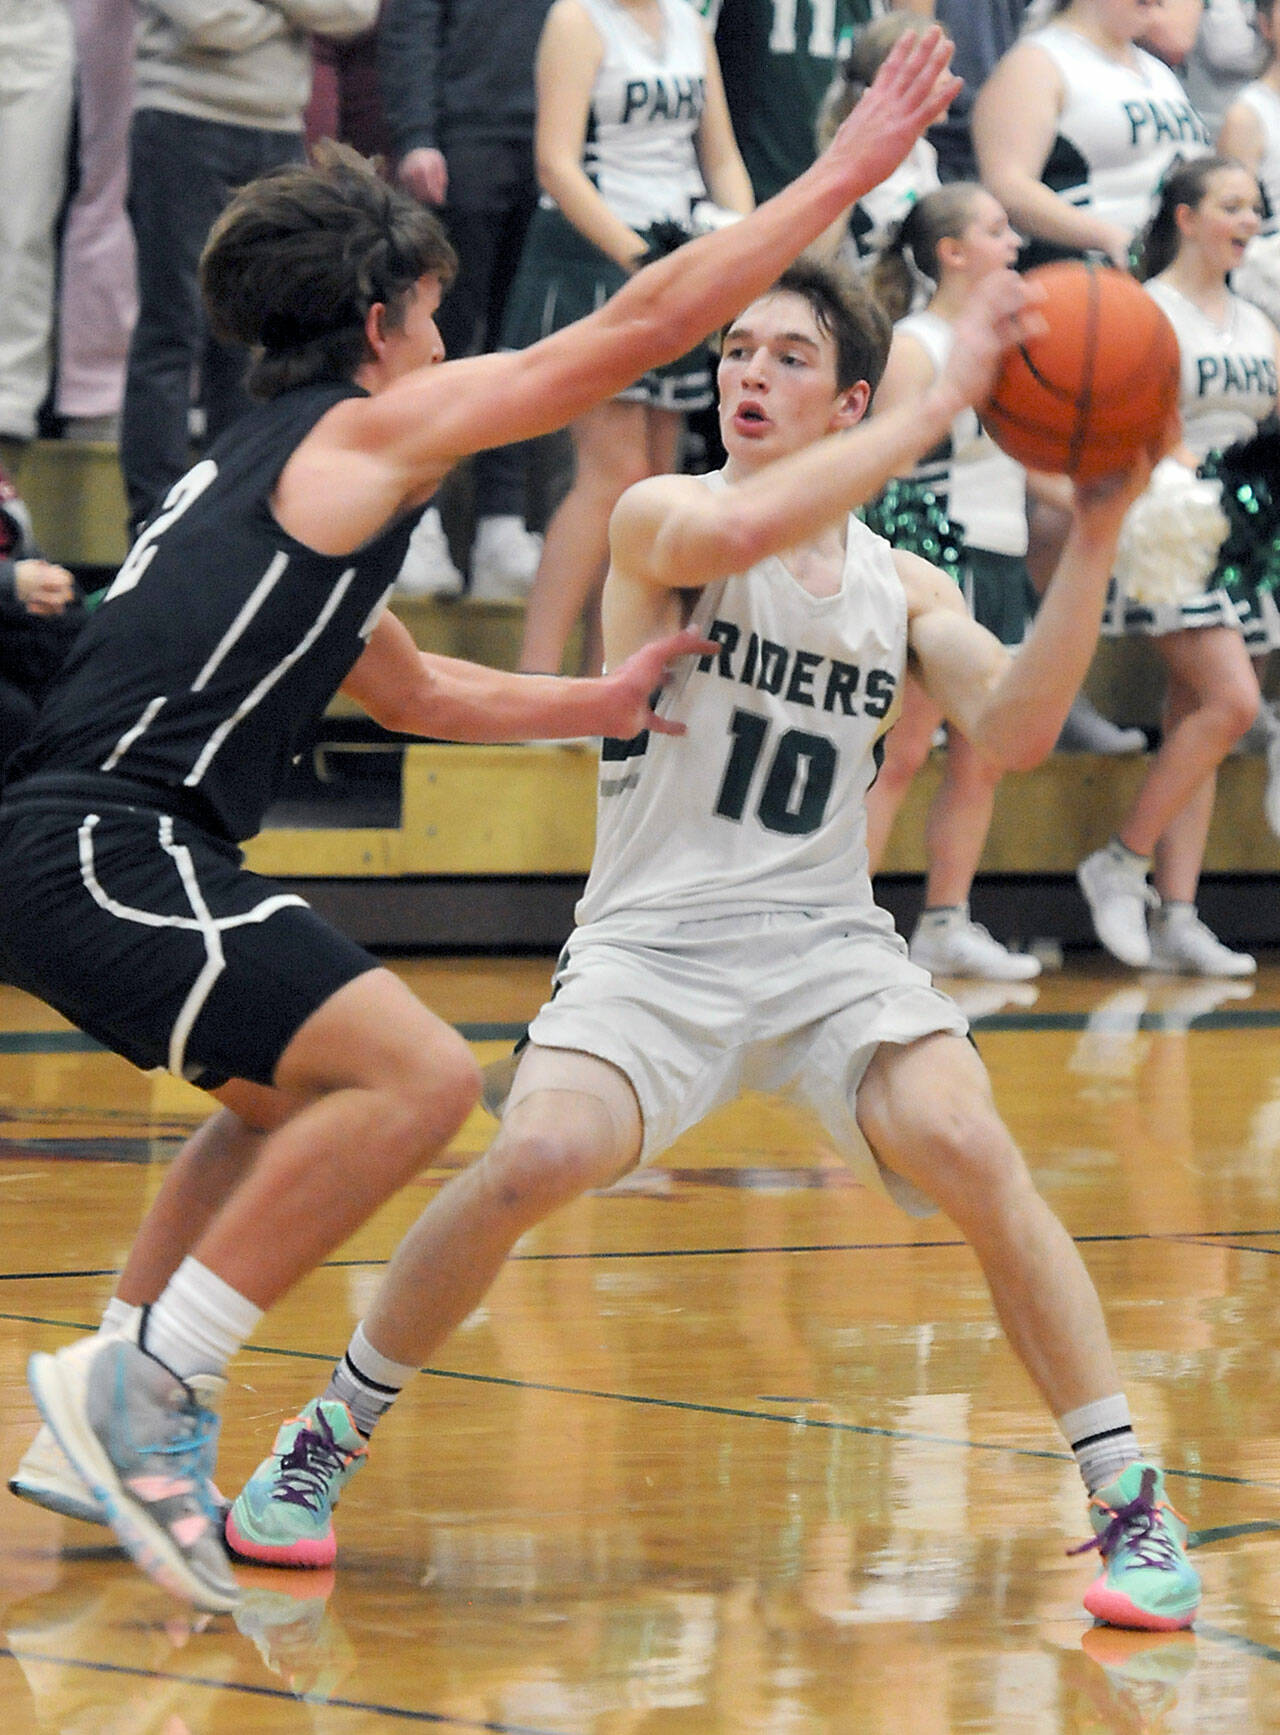 KEITH THORPE/PENINSULA DAILY NEWS Josiah Long of Port Angeles, right, looks for his teammates as North Kitsap’s Mason Chmielewski blocks the way during Thursday’s game in Port Angeles.